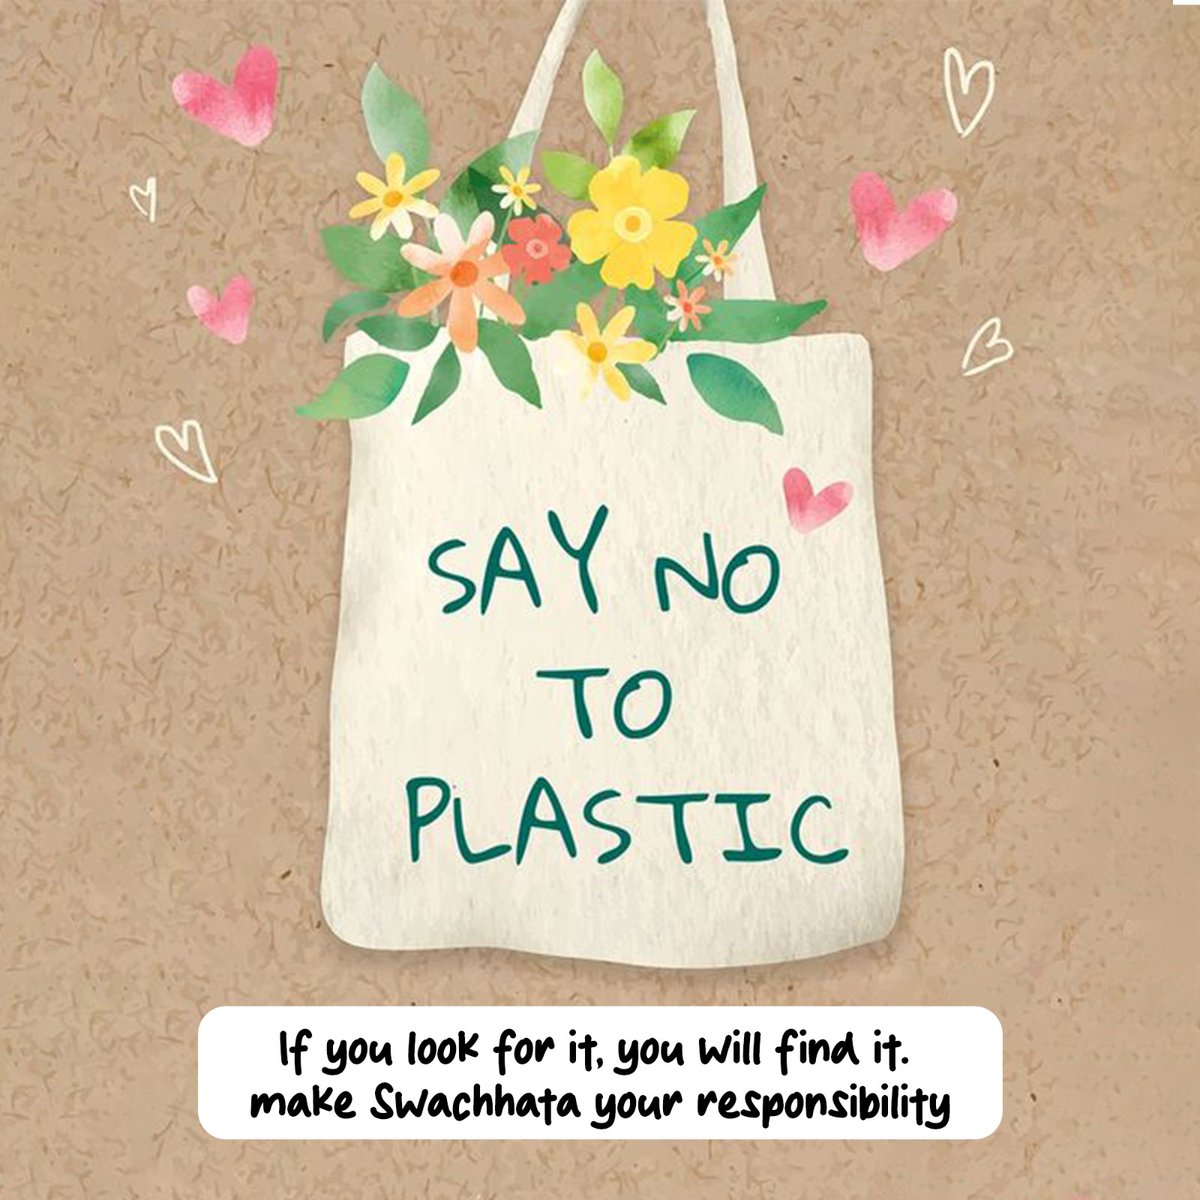 Say no to single-use plastic. Embrace sustainable alternatives like reusable bags and take charge of cleanliness Let's make Swachhata everyone's priority. #SayNotoSUP